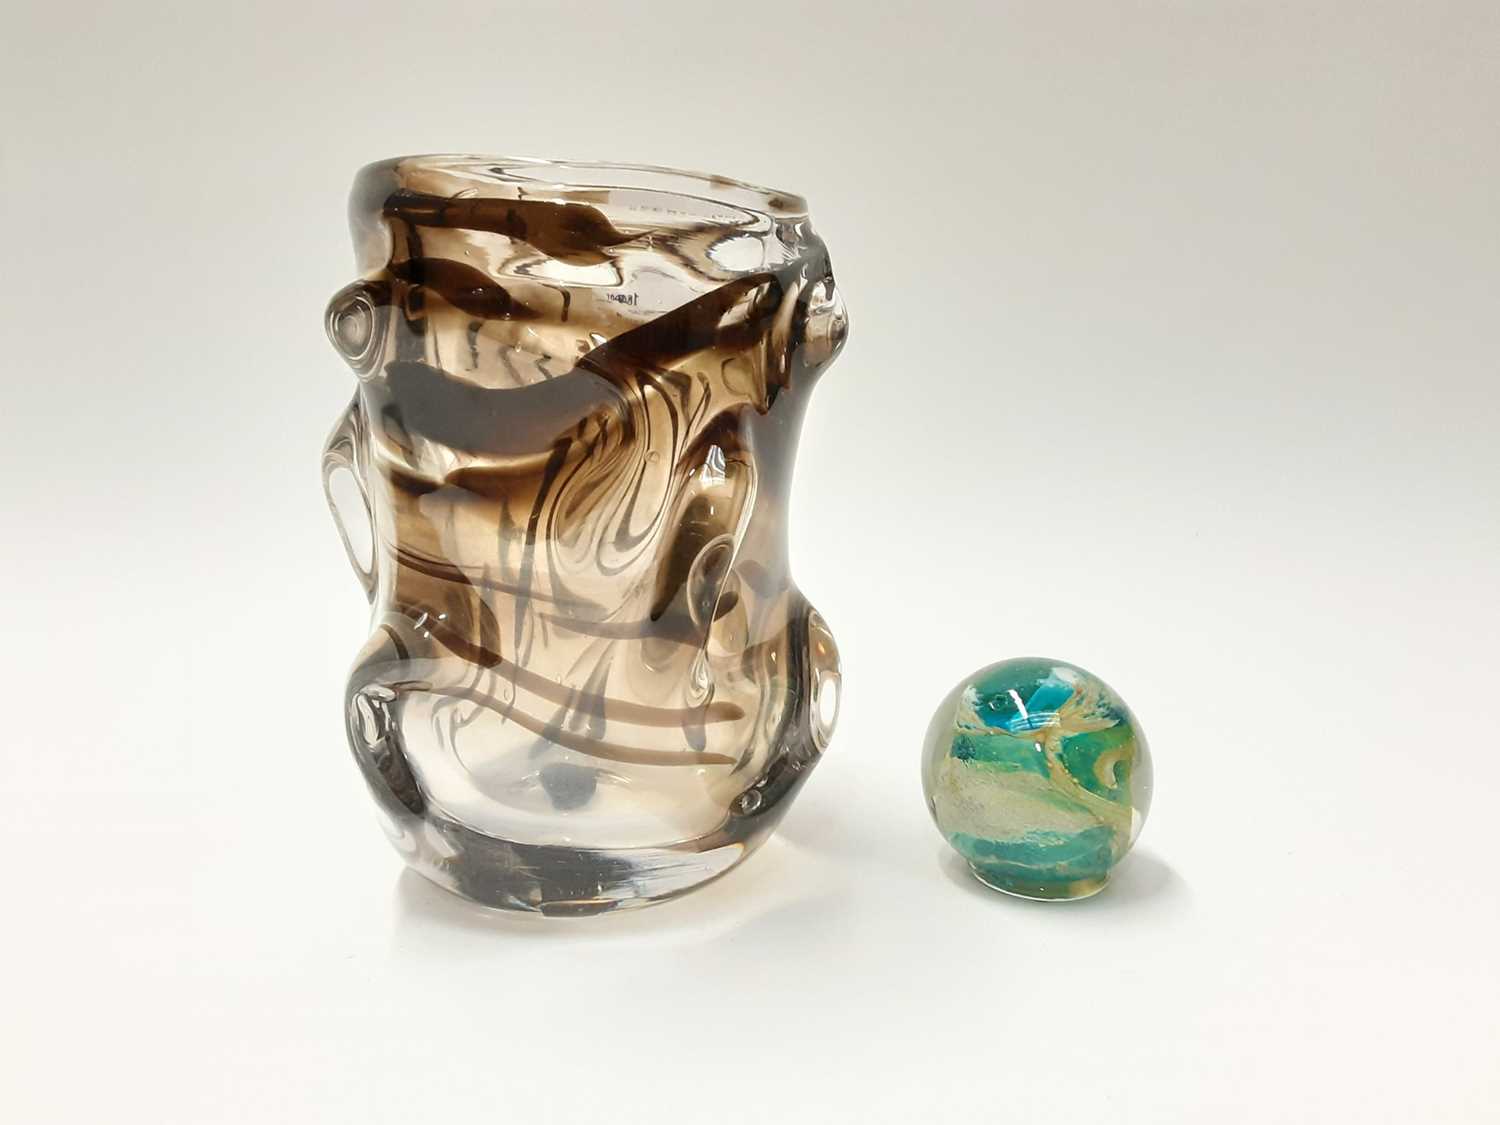 Lot 164 - Whitefriars streaky knobbly vase, 18.5cm high and a Michael Harris Isle of Wight paperweight (2)